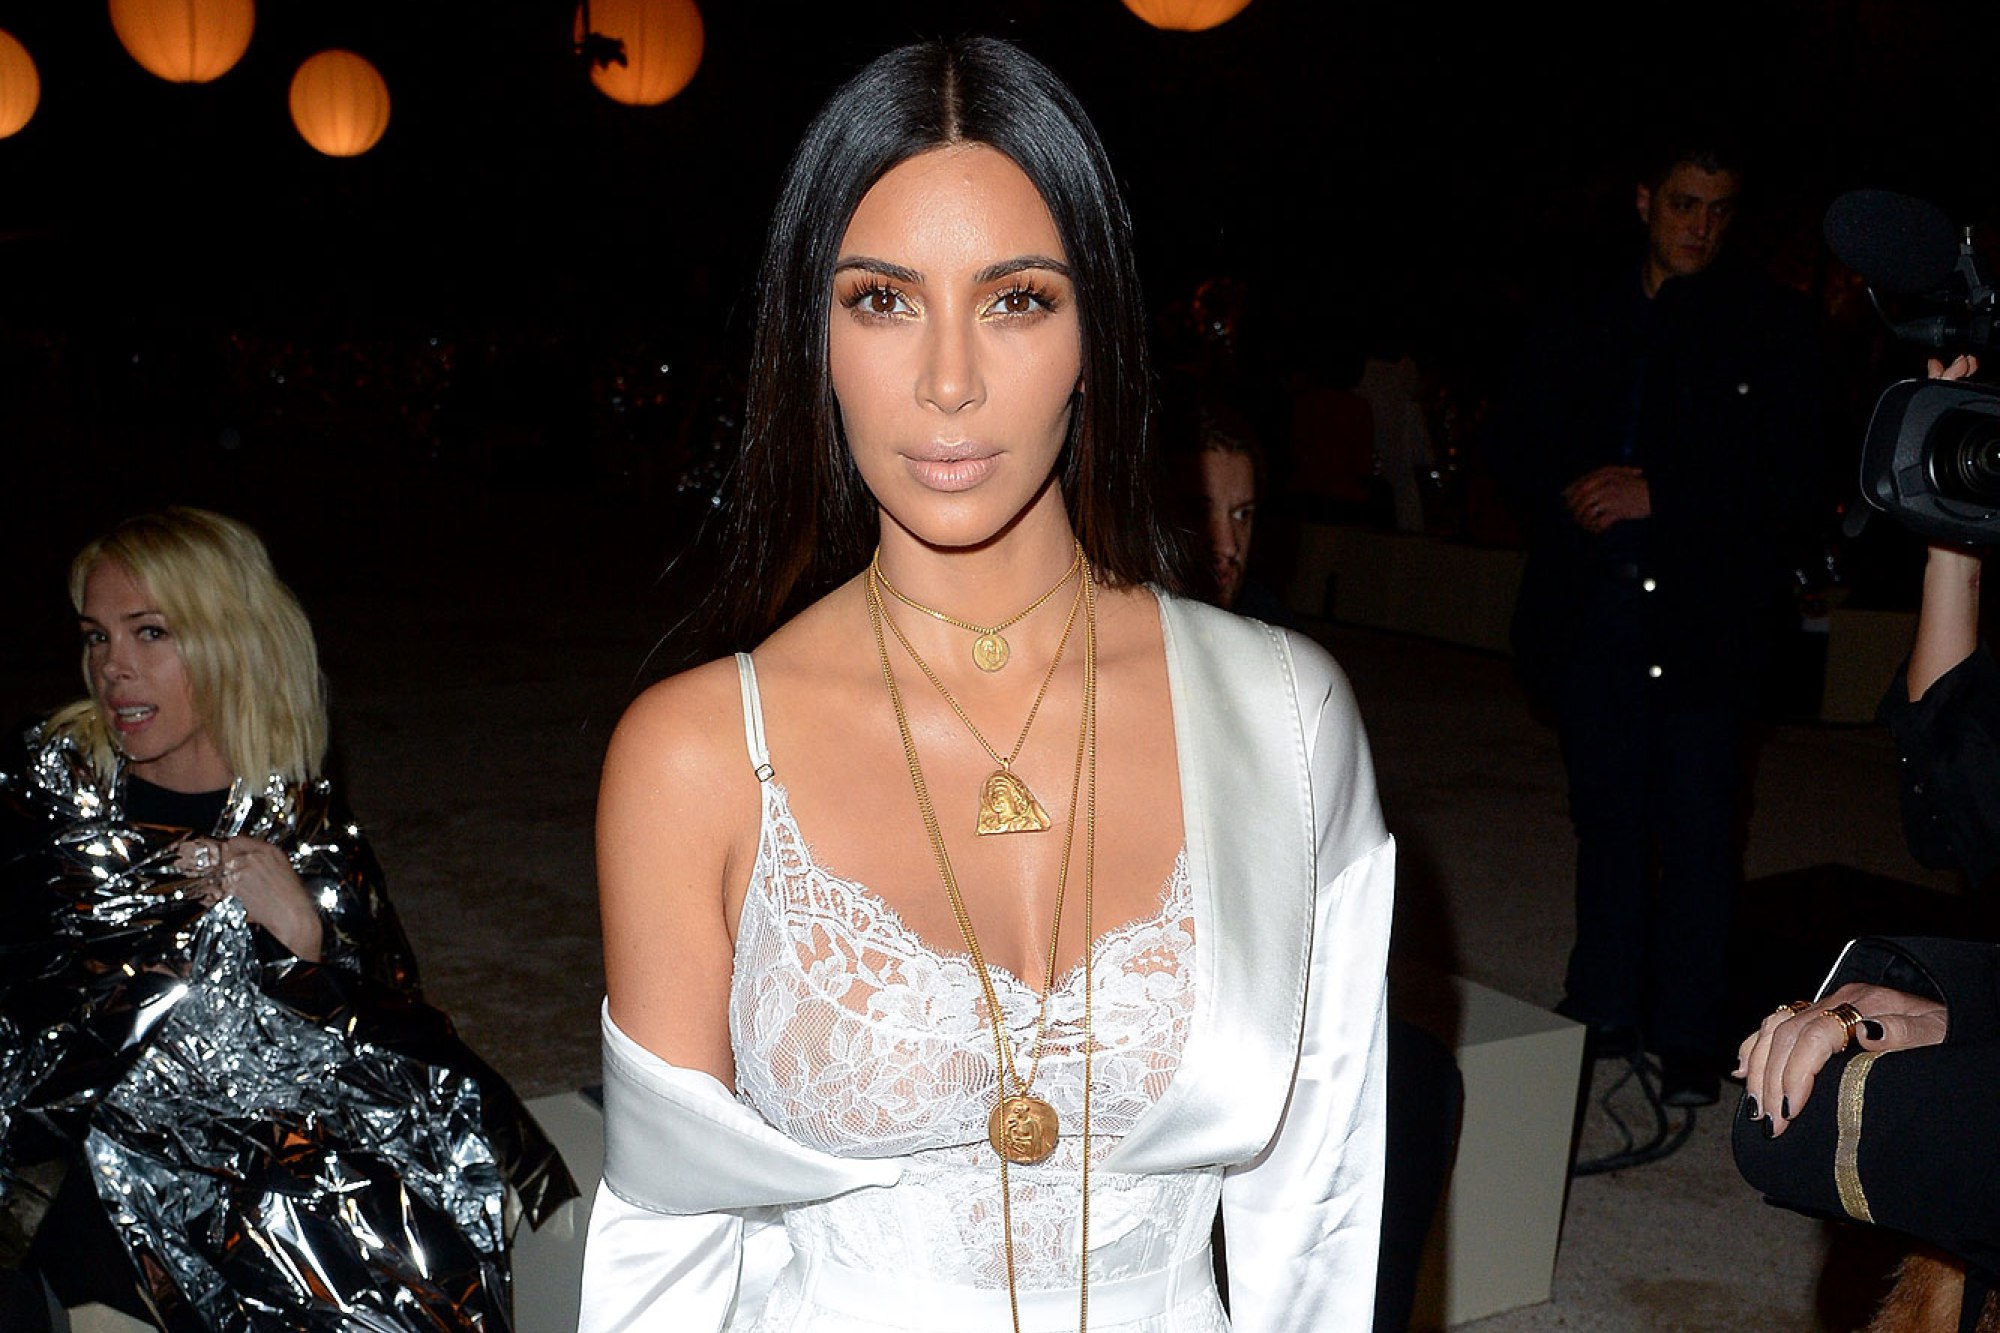 Inside Kim Kardashian West's Night of Terror: 'She Knew She Had to Keep Quiet to Survive'